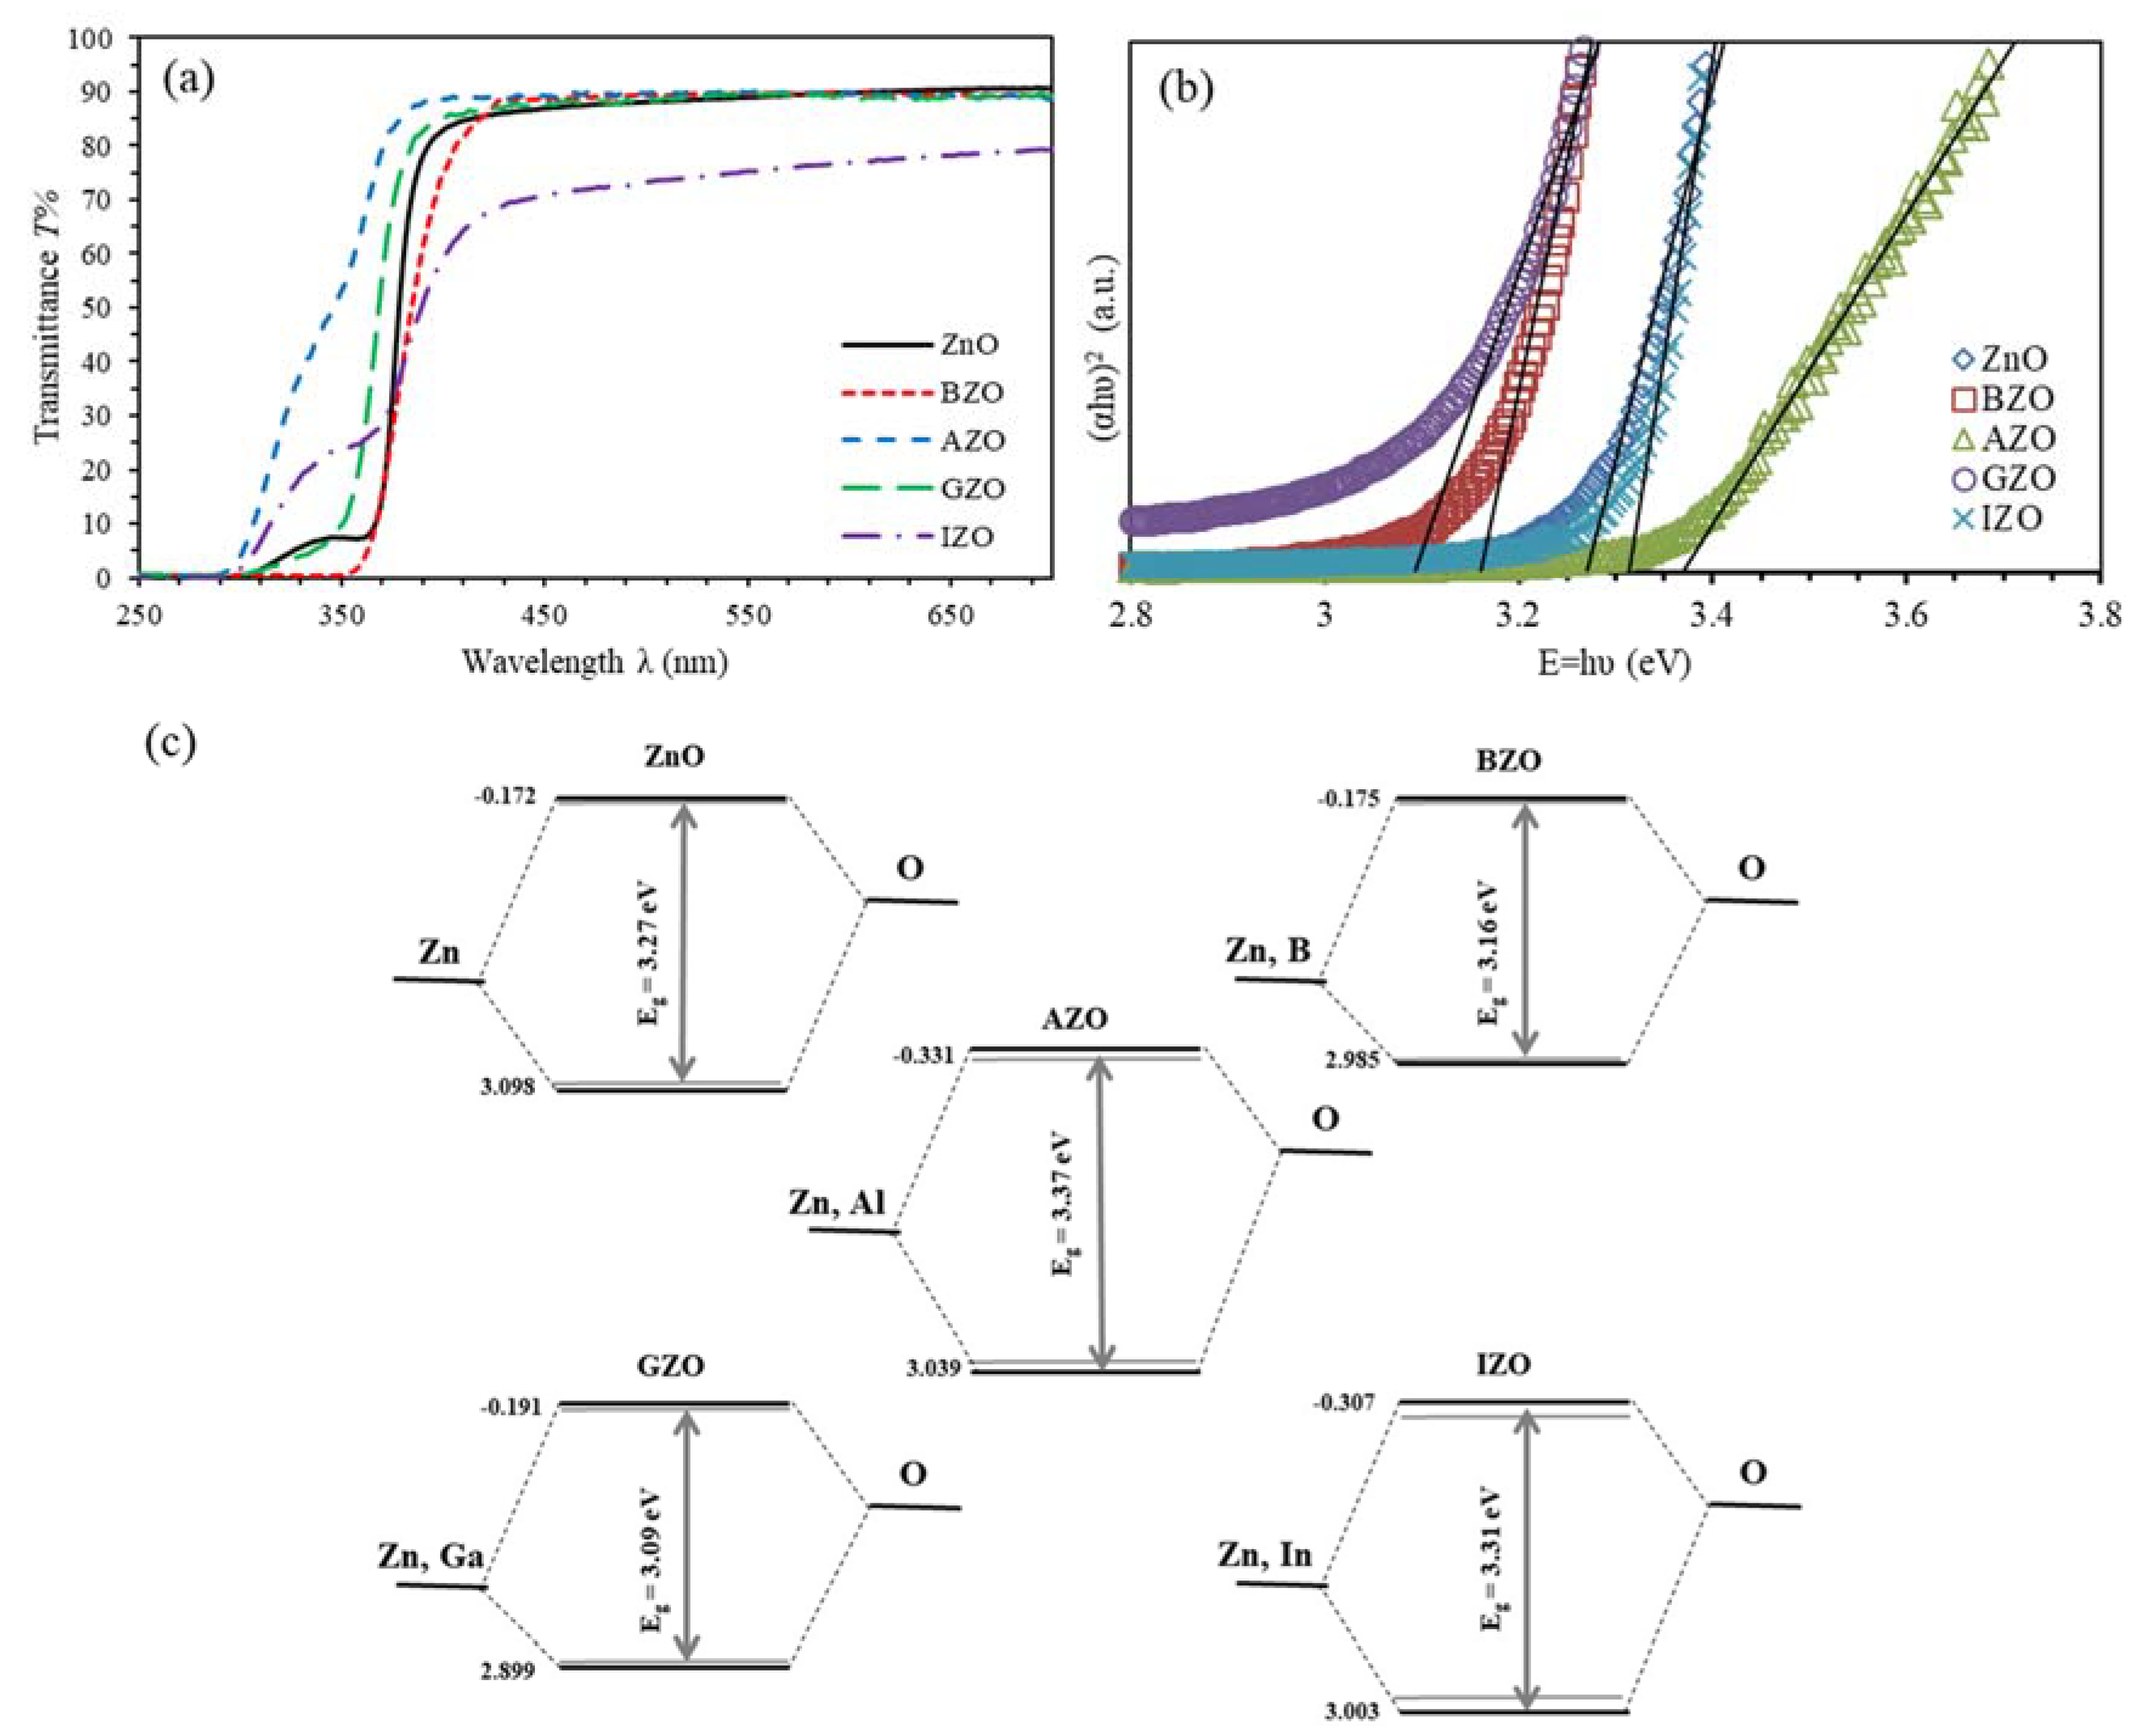 Crystals | Free Full-Text | Structural, Optoelectrical, Linear, and  Nonlinear Optical Characterizations of Dip-Synthesized Undoped ZnO and  Group III Elements (B, Al, Ga, and In)-Doped ZnO Thin Films | HTML